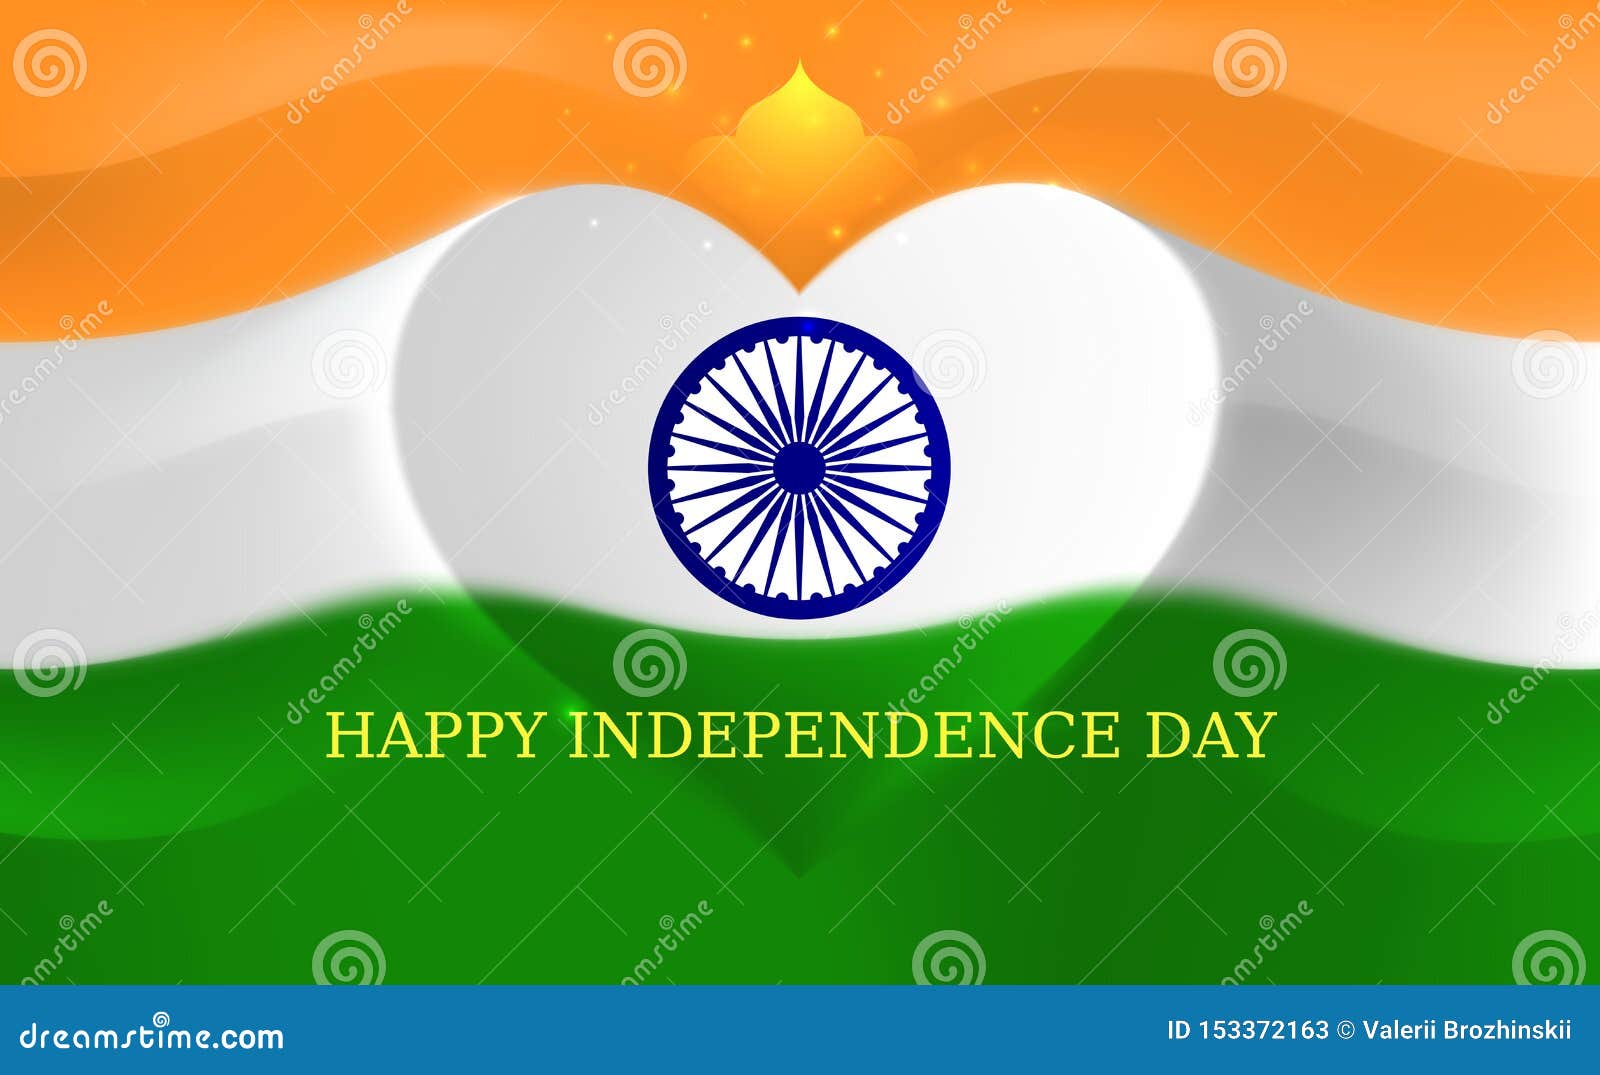 India Independence Day, Heart Shaped Indian Flag Vector Template. August 15.  Background with Flying Flag Stock Vector - Illustration of national, happy:  153372163